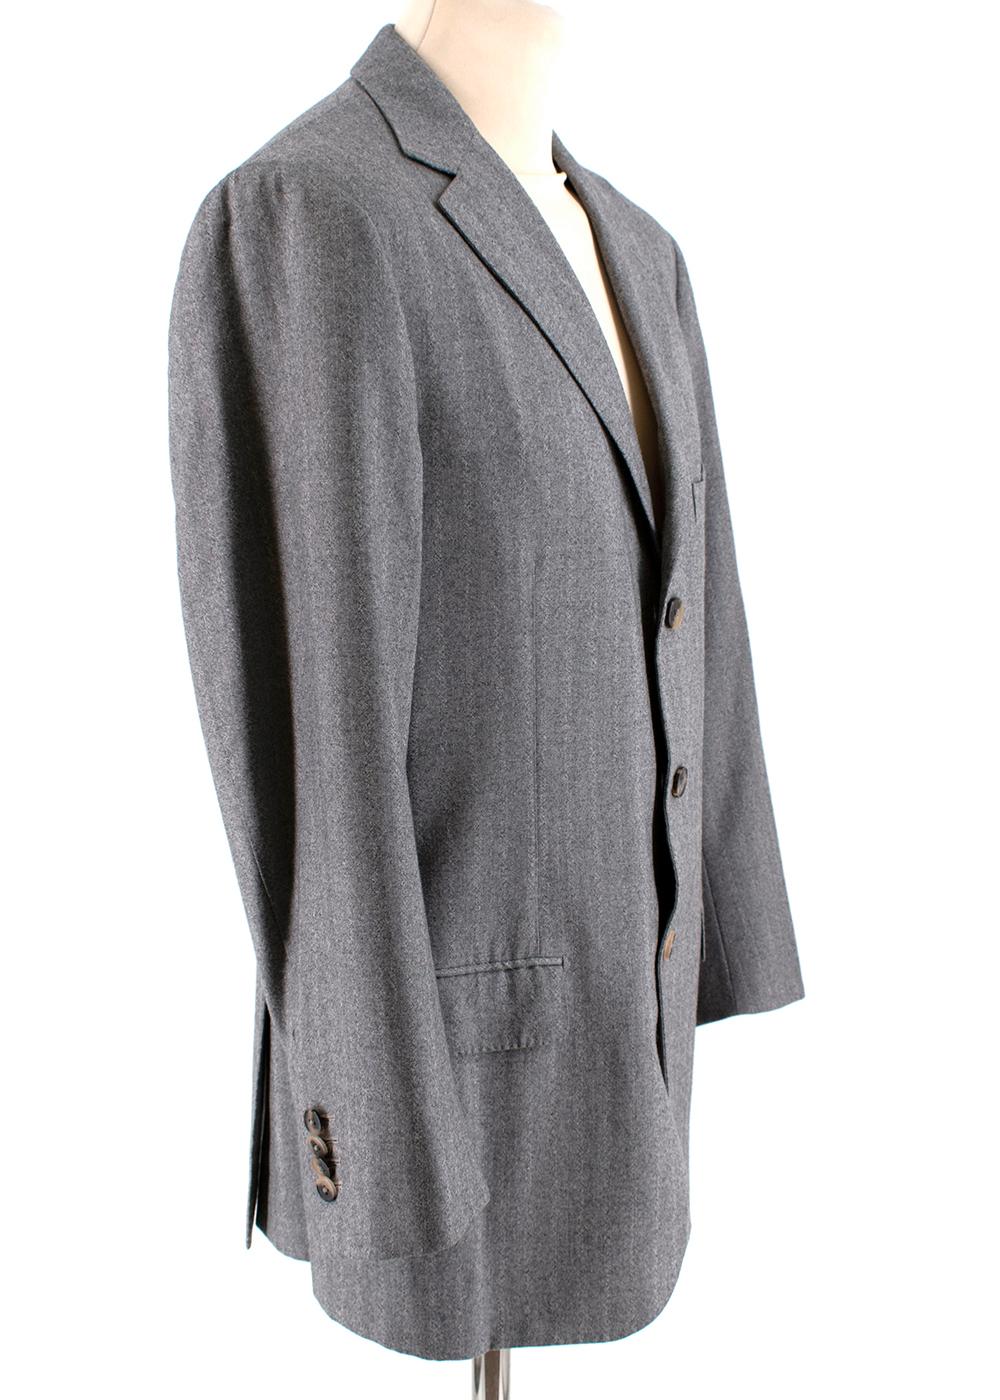 Ermenegildo Zegna Couture Grey Wool Single Breasted Suit

-Classic Design 
-Discreet and elegant striped pattern
-Soft lightweight texture
(Jacket)
-3 functional outer pockets 
-4 inner pockets 
-Fully lined
(Trousers)
-5 pockets